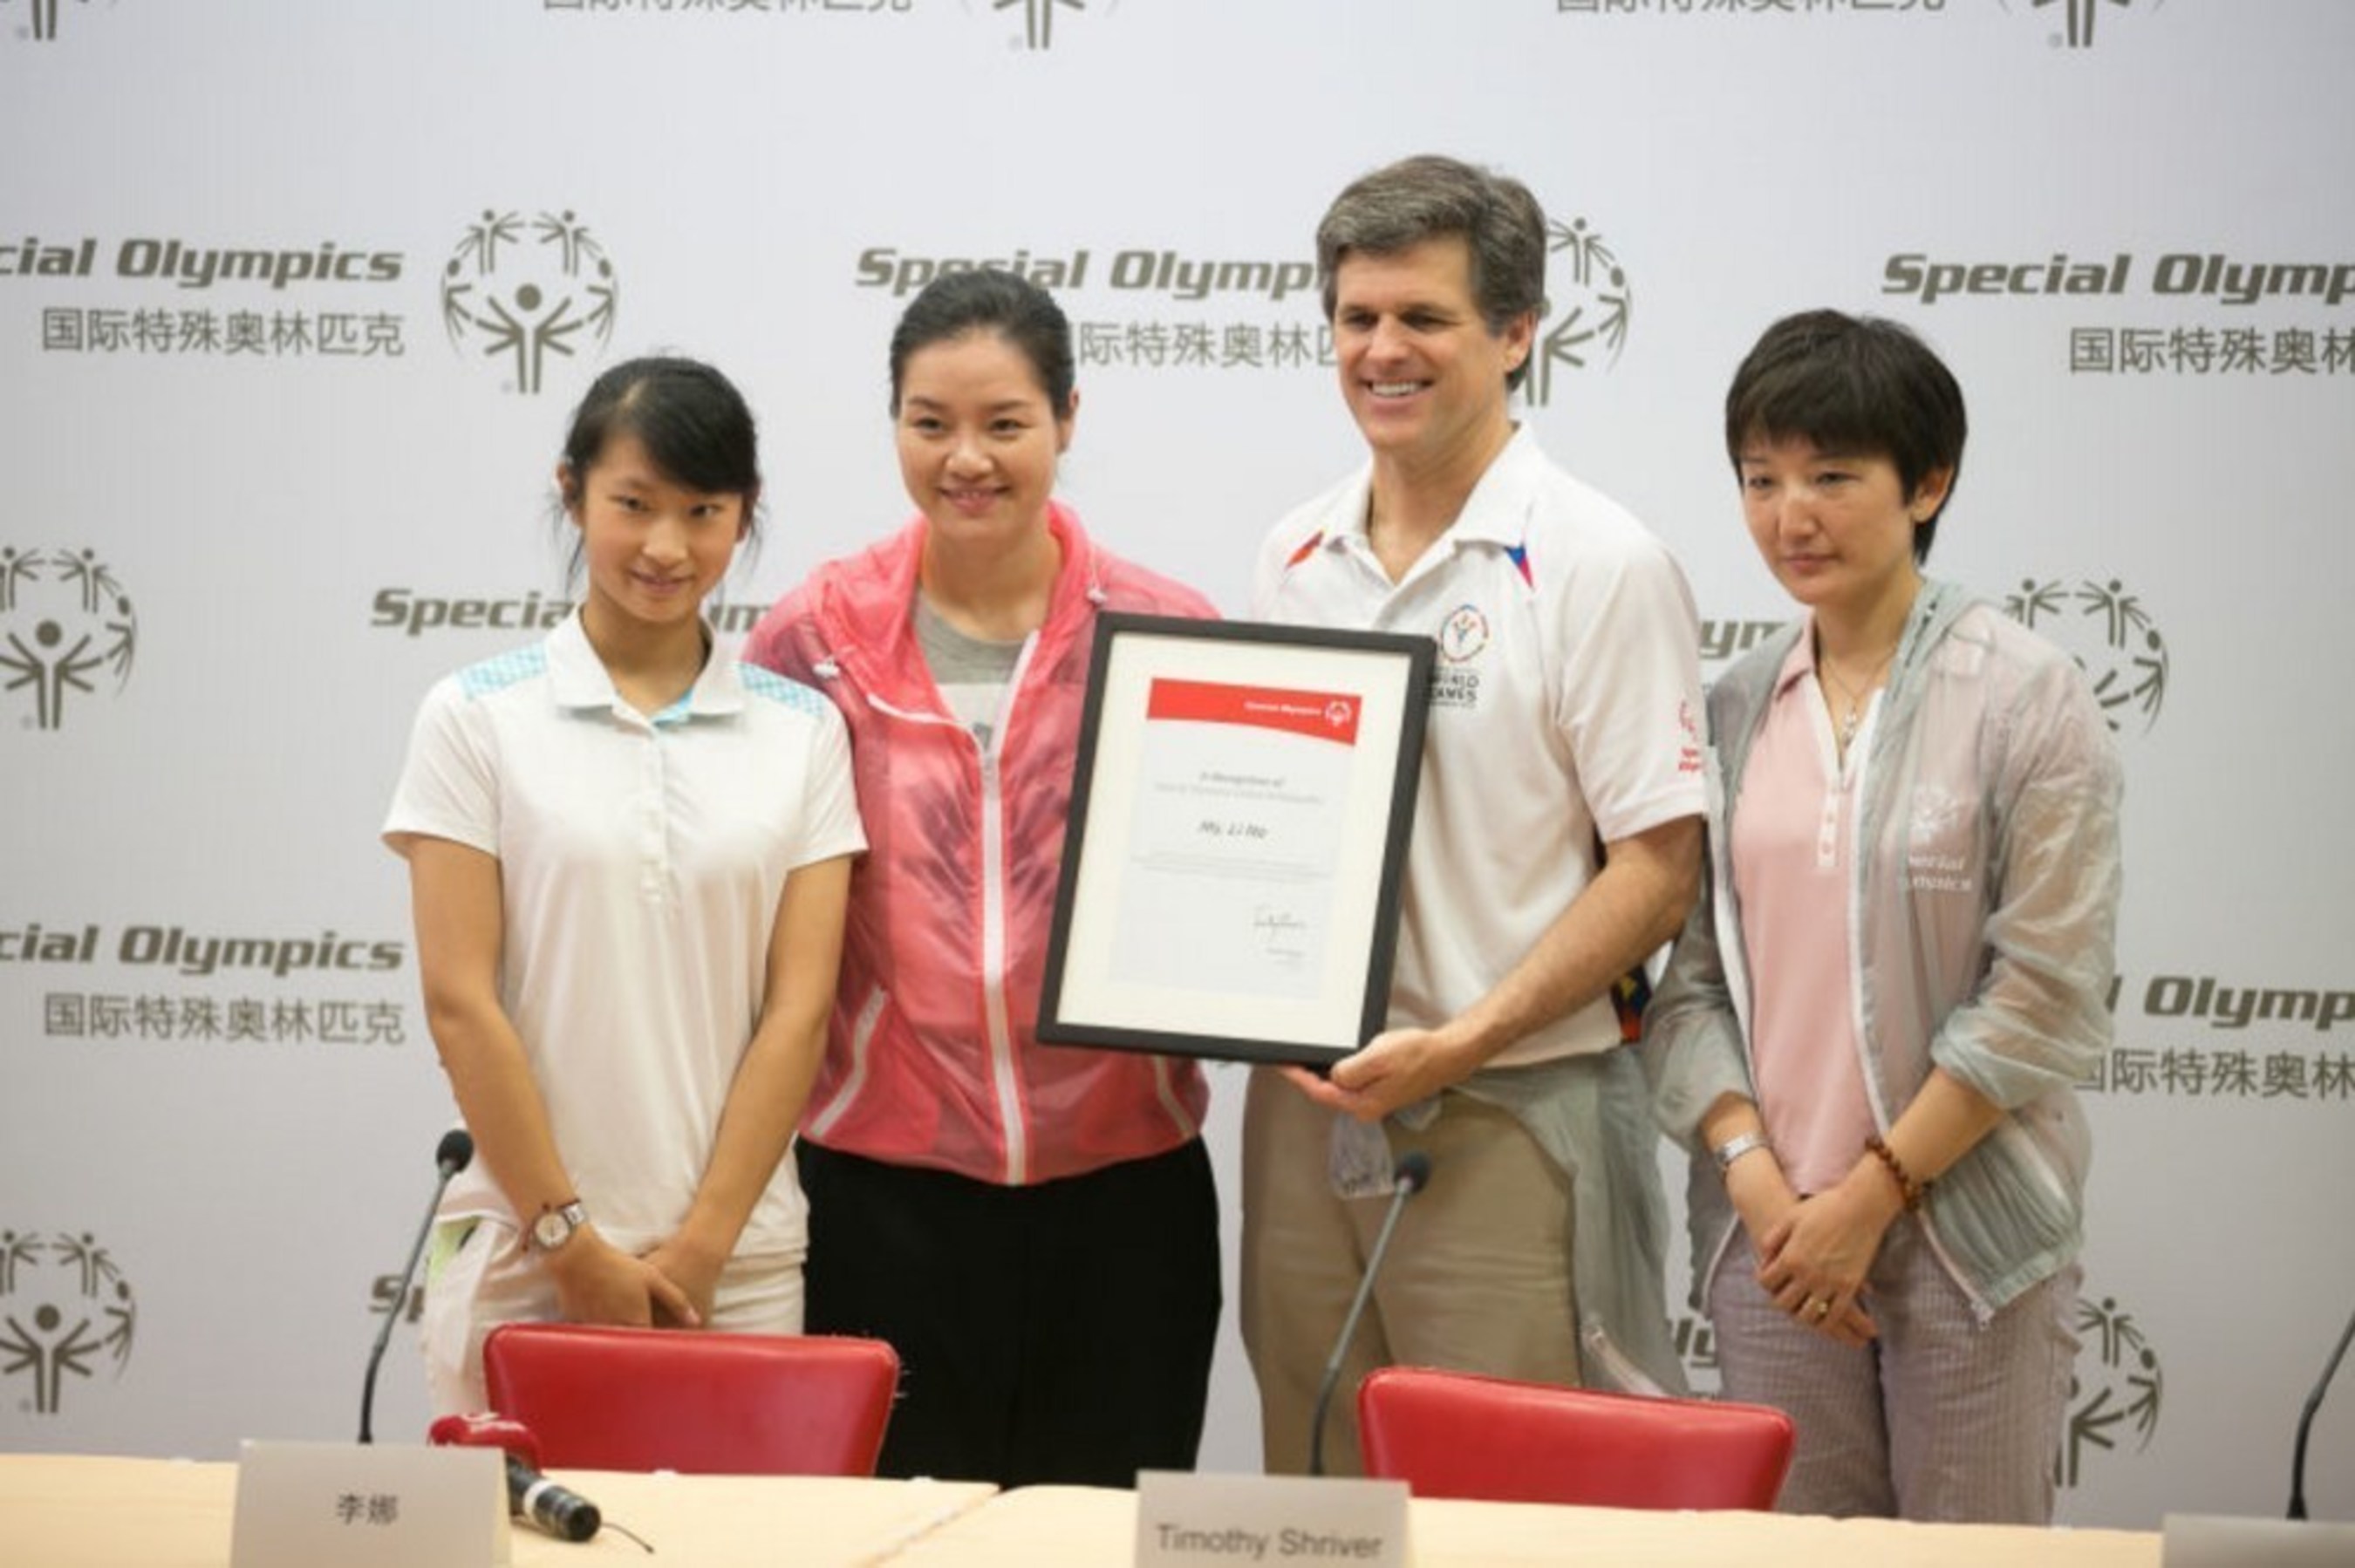 Dr. Timothy P. Shriver, Chairman of Special Olympics awarded Li Na with the official commissioning certificate of Global Ambassador